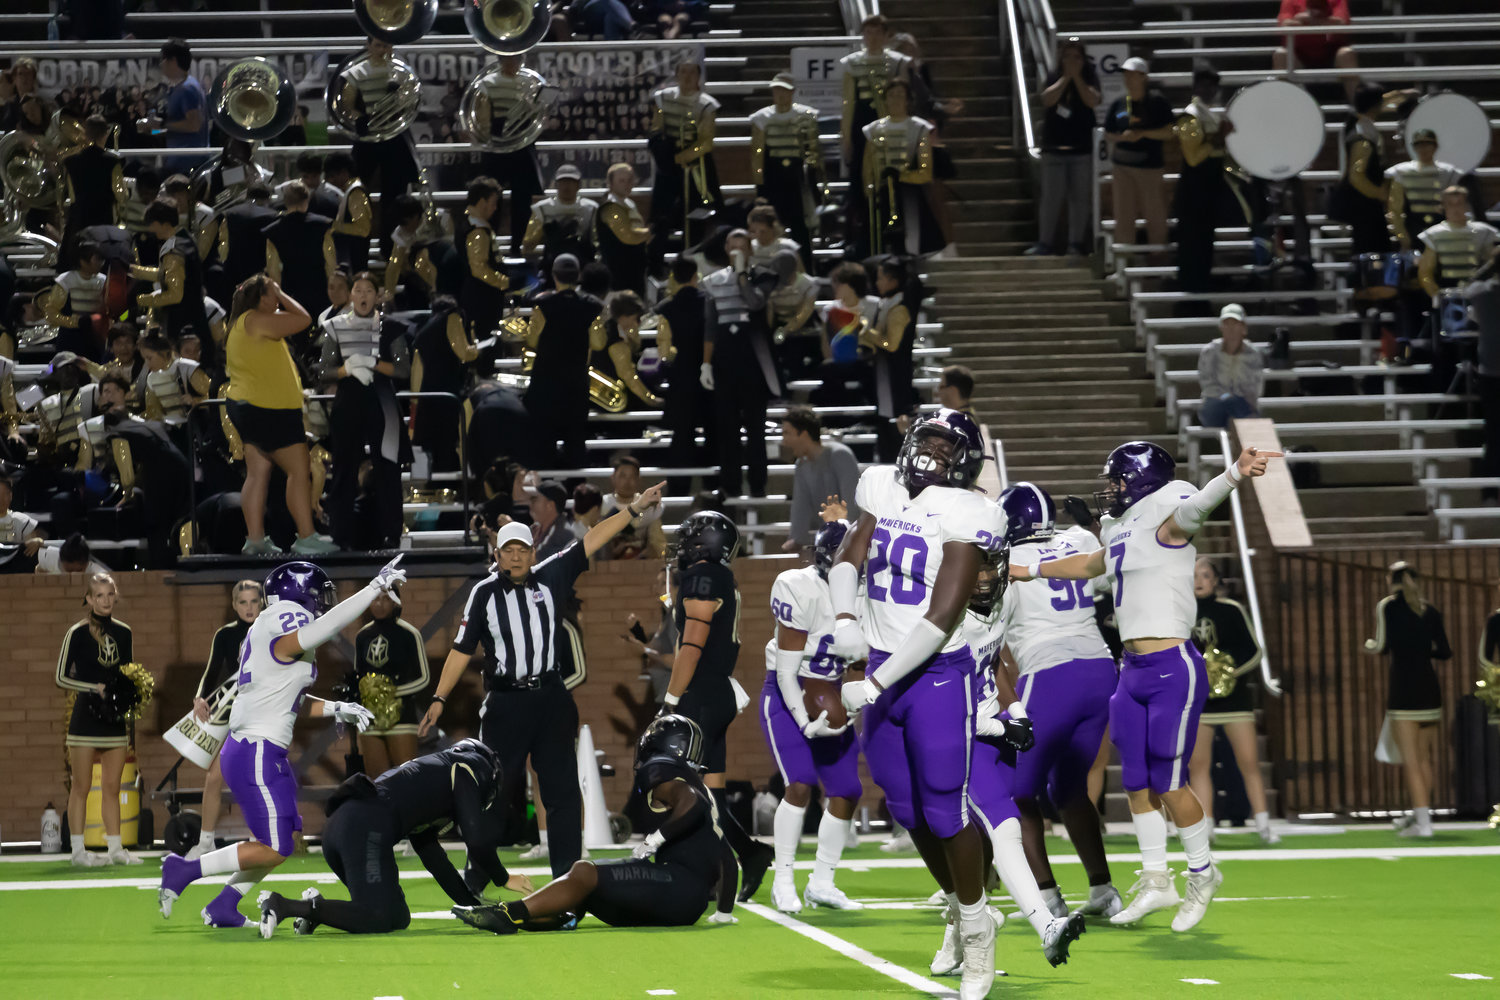 Morton Ranch players celebrate after making a fourth down stop during Thursday's game between Morton Ranch and Jordan at Rhodes Stadium.